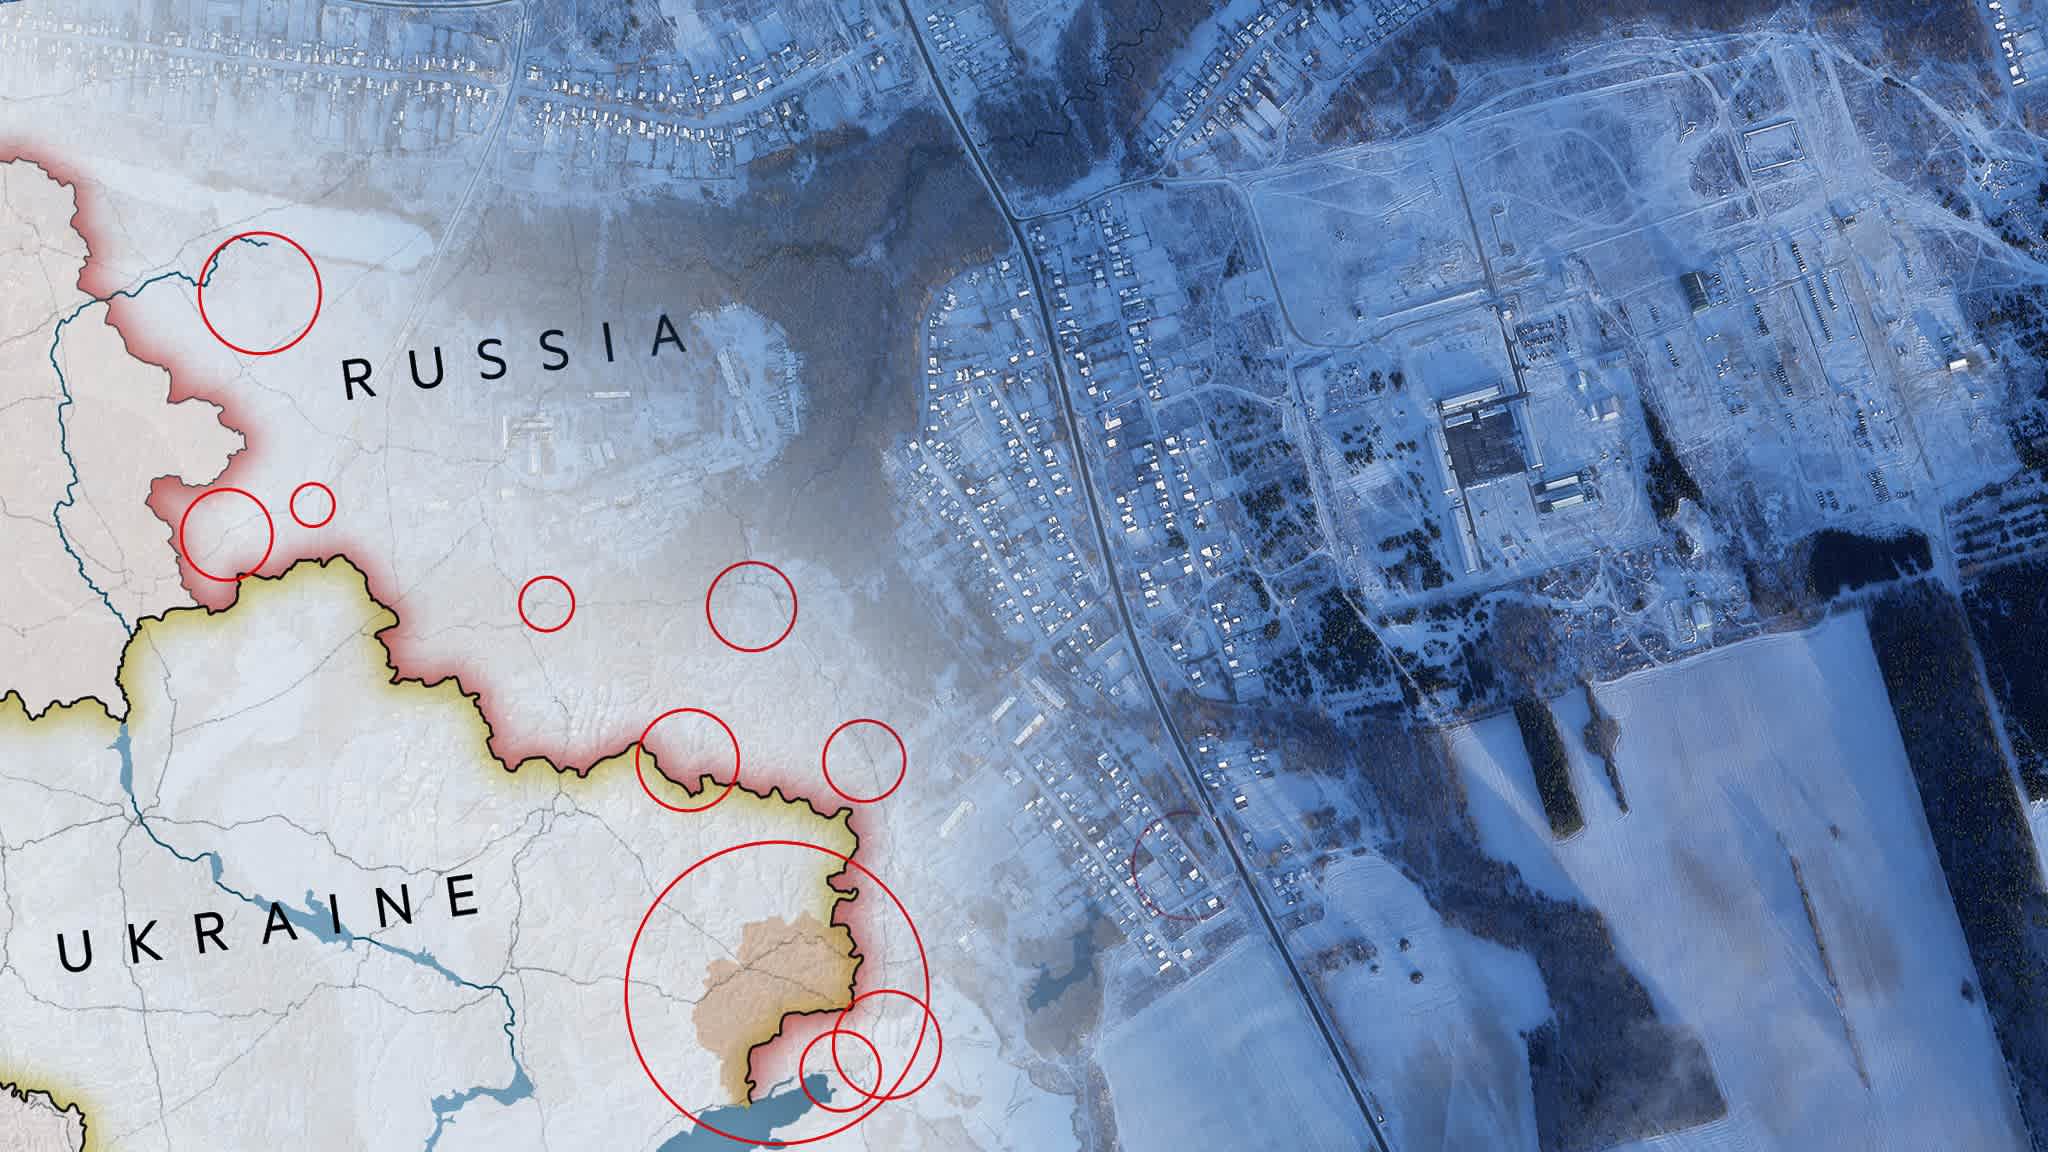 How serious is Vladimir Putin about launching a major Ukraine offensive?